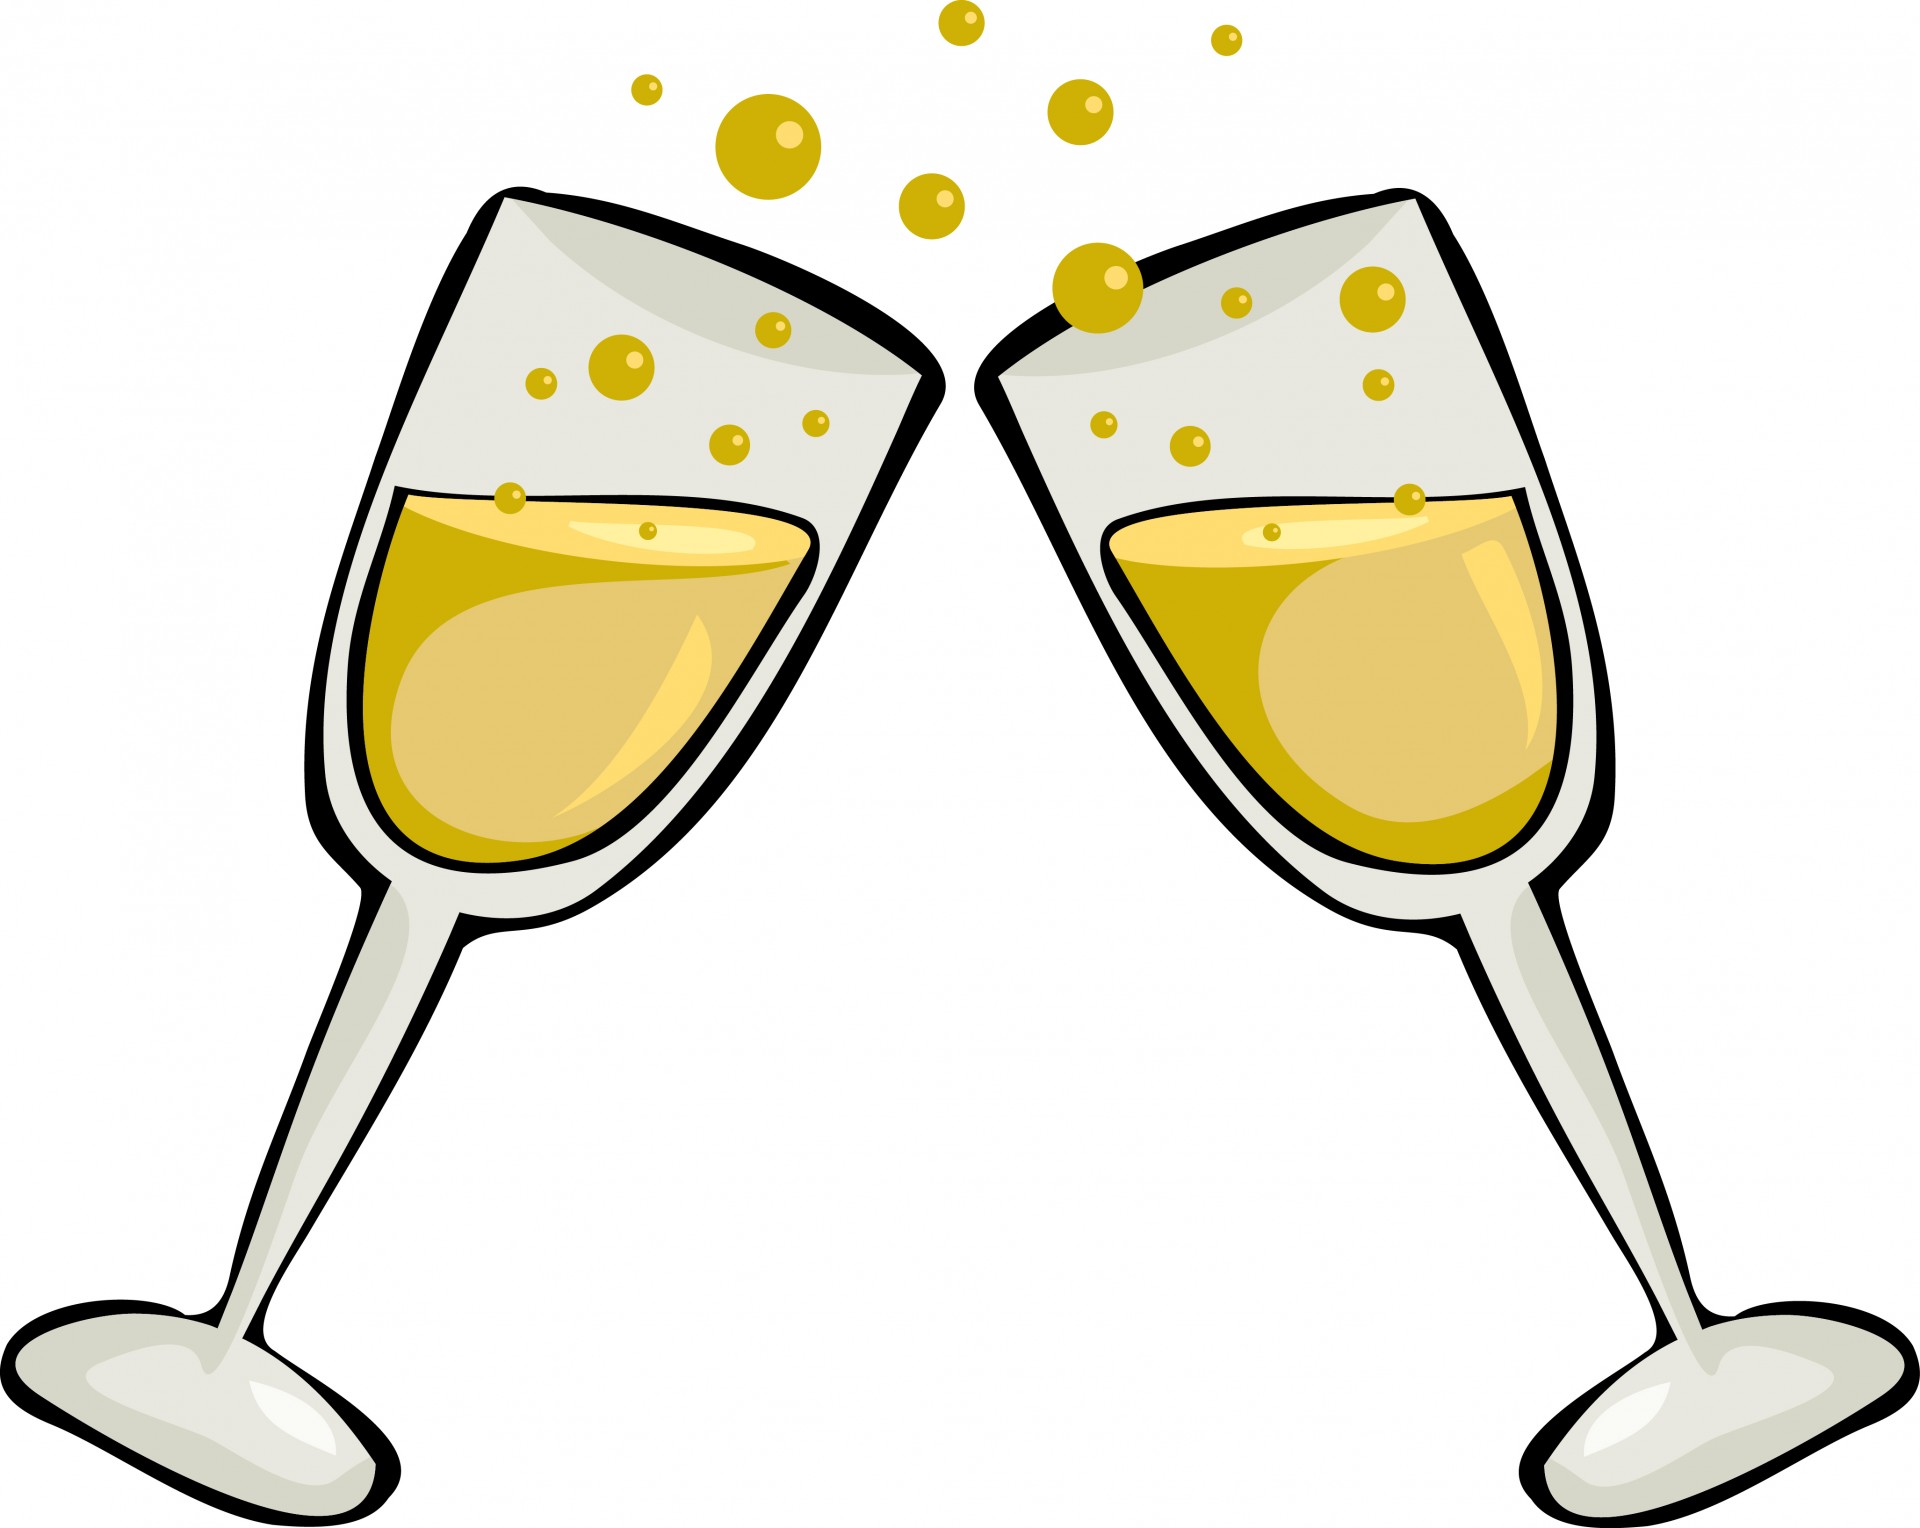 Alcohol clipart cheer. Cheers free stock photo